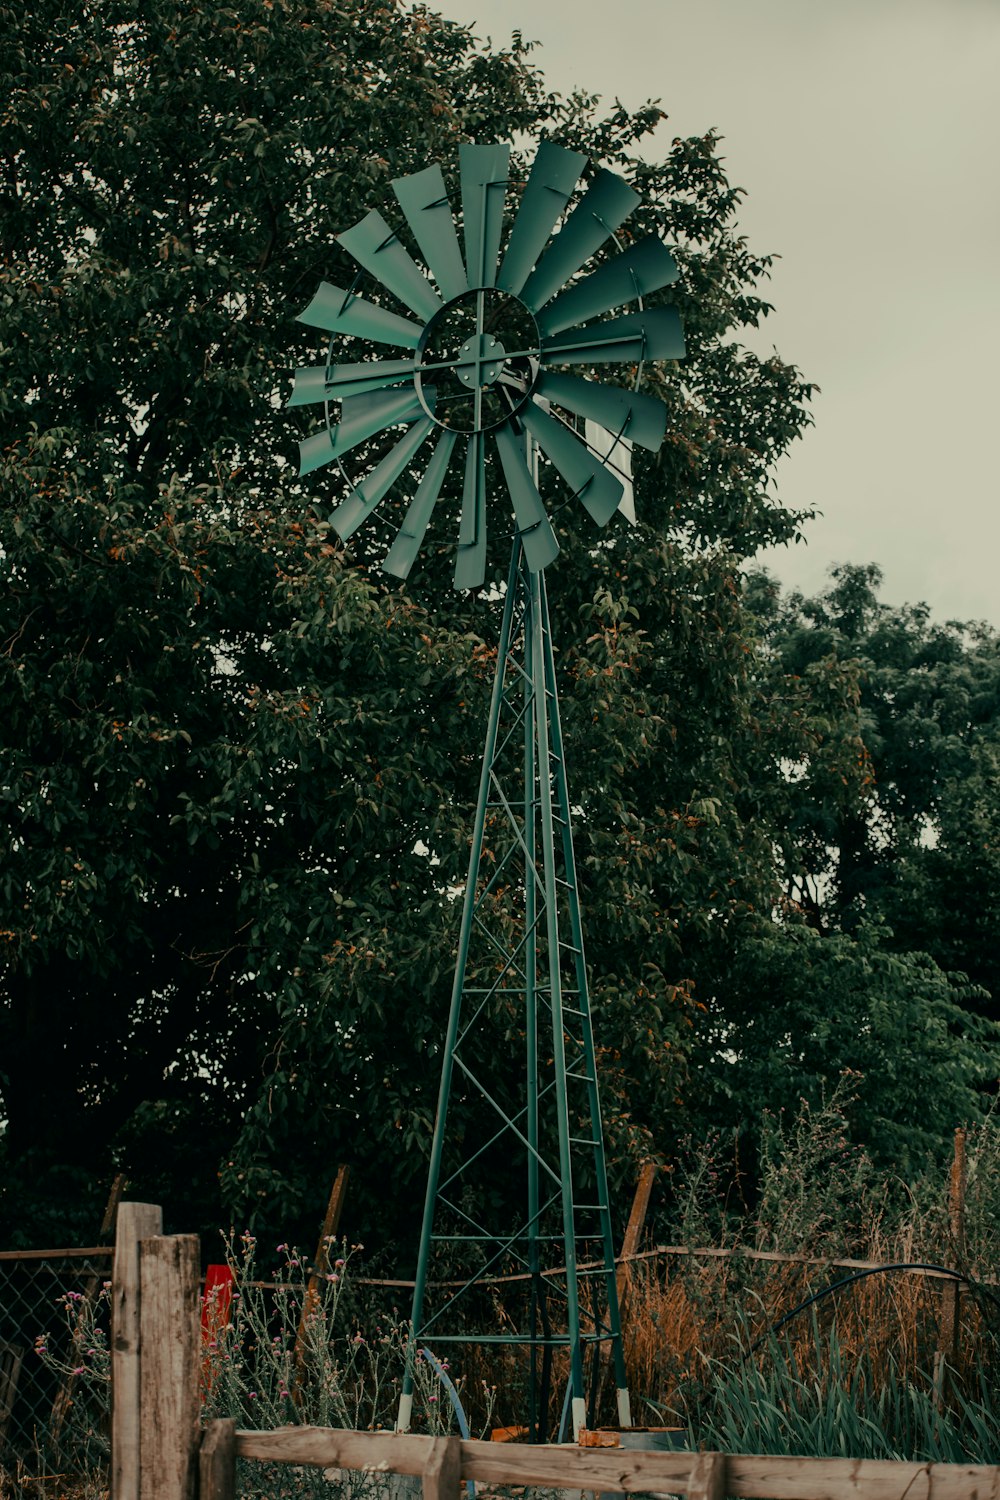 a green windmill sitting next to a wooden fence